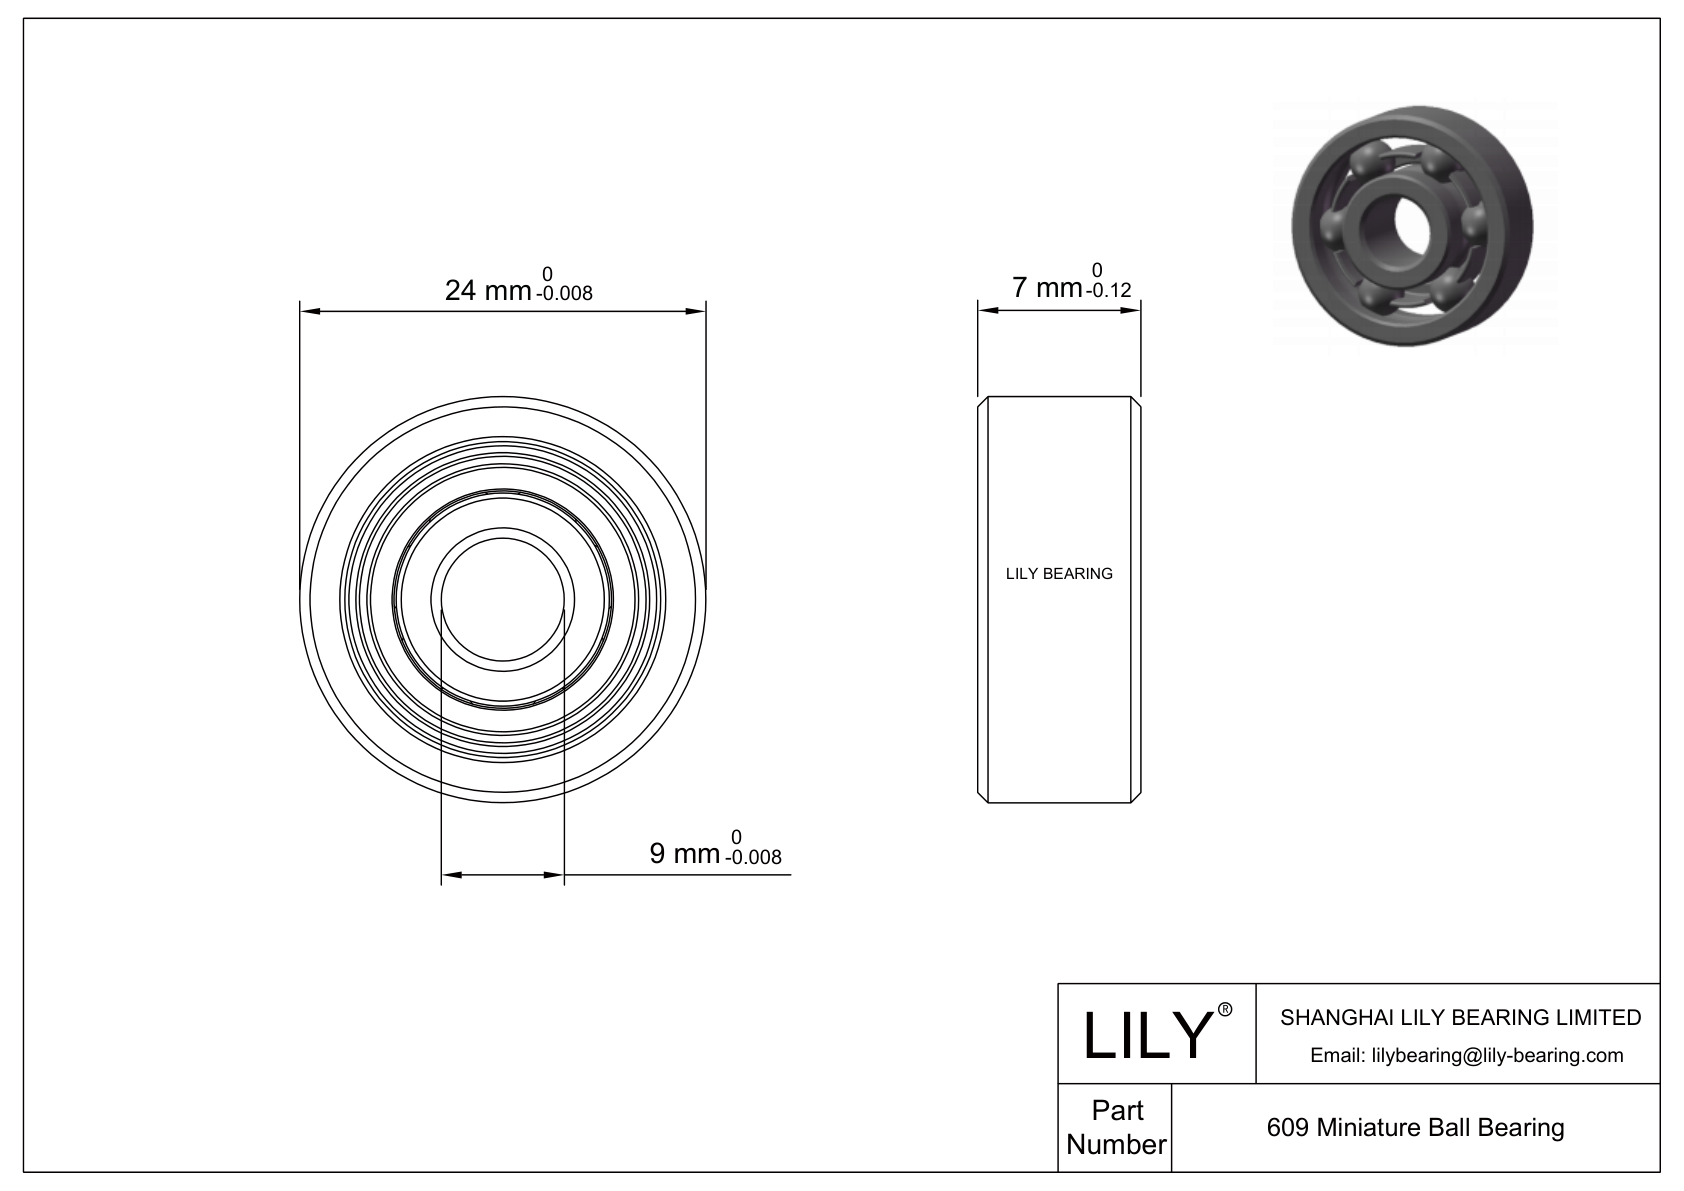 LILY-BS60957-11 POM Coated Bearing cad drawing